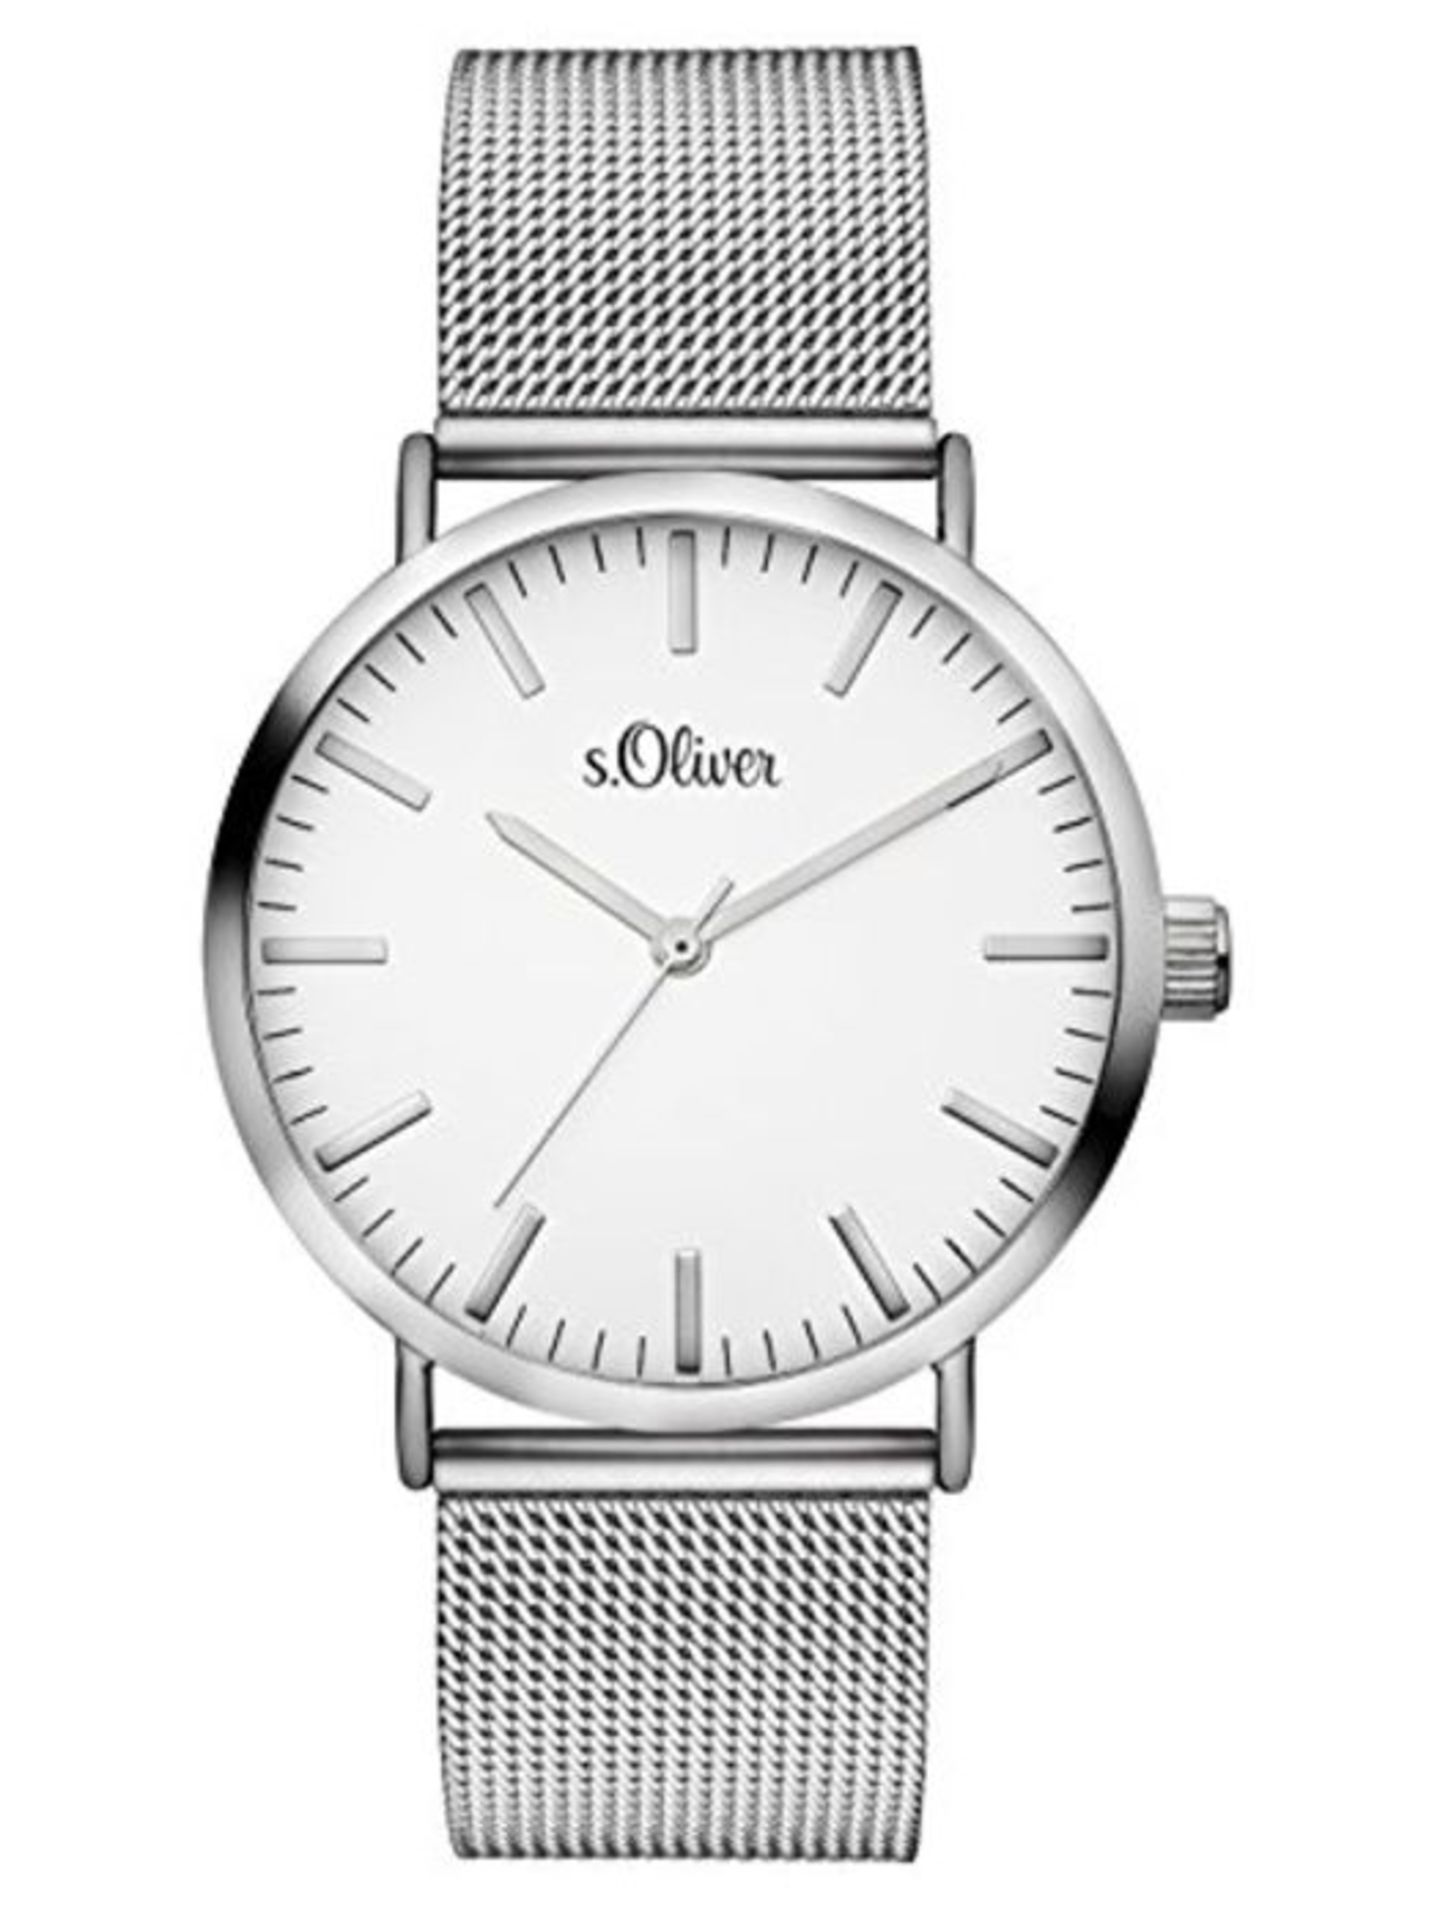 s.Oliver women's analogue quartz wristwatch with stainless steel bracelet SO-3145-MQ - Image 3 of 5